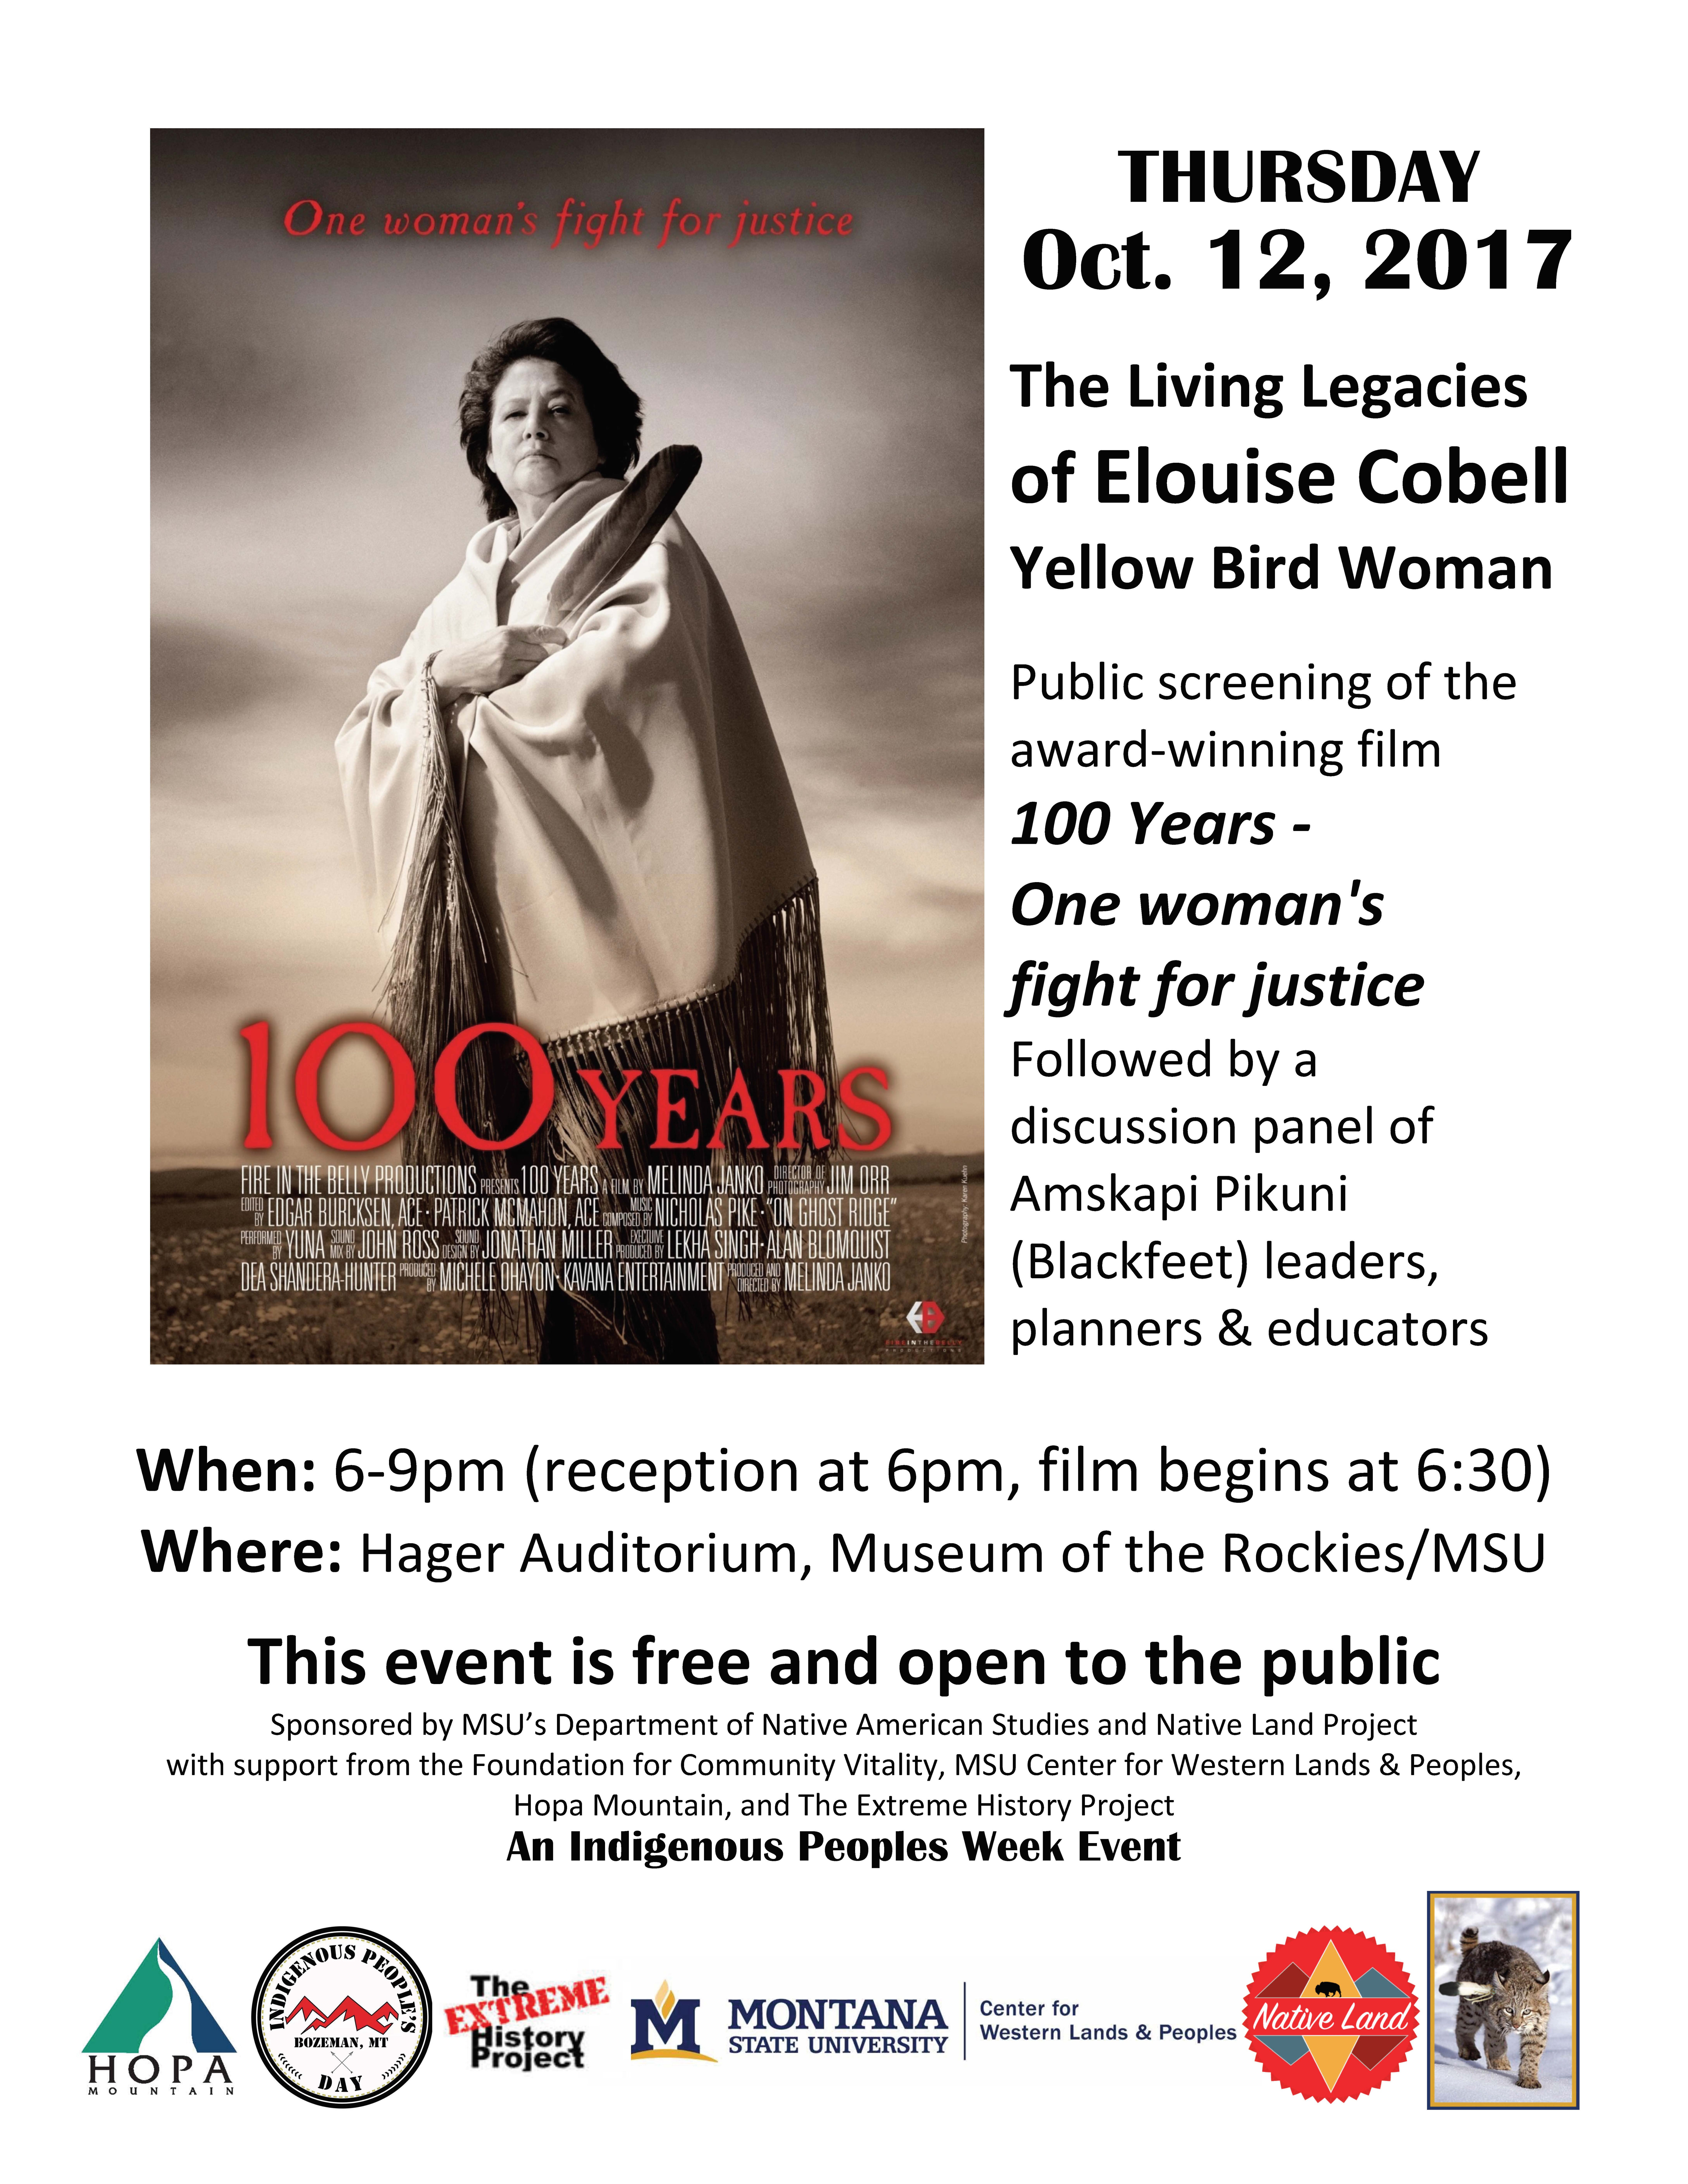 Elouise Cobell event poster